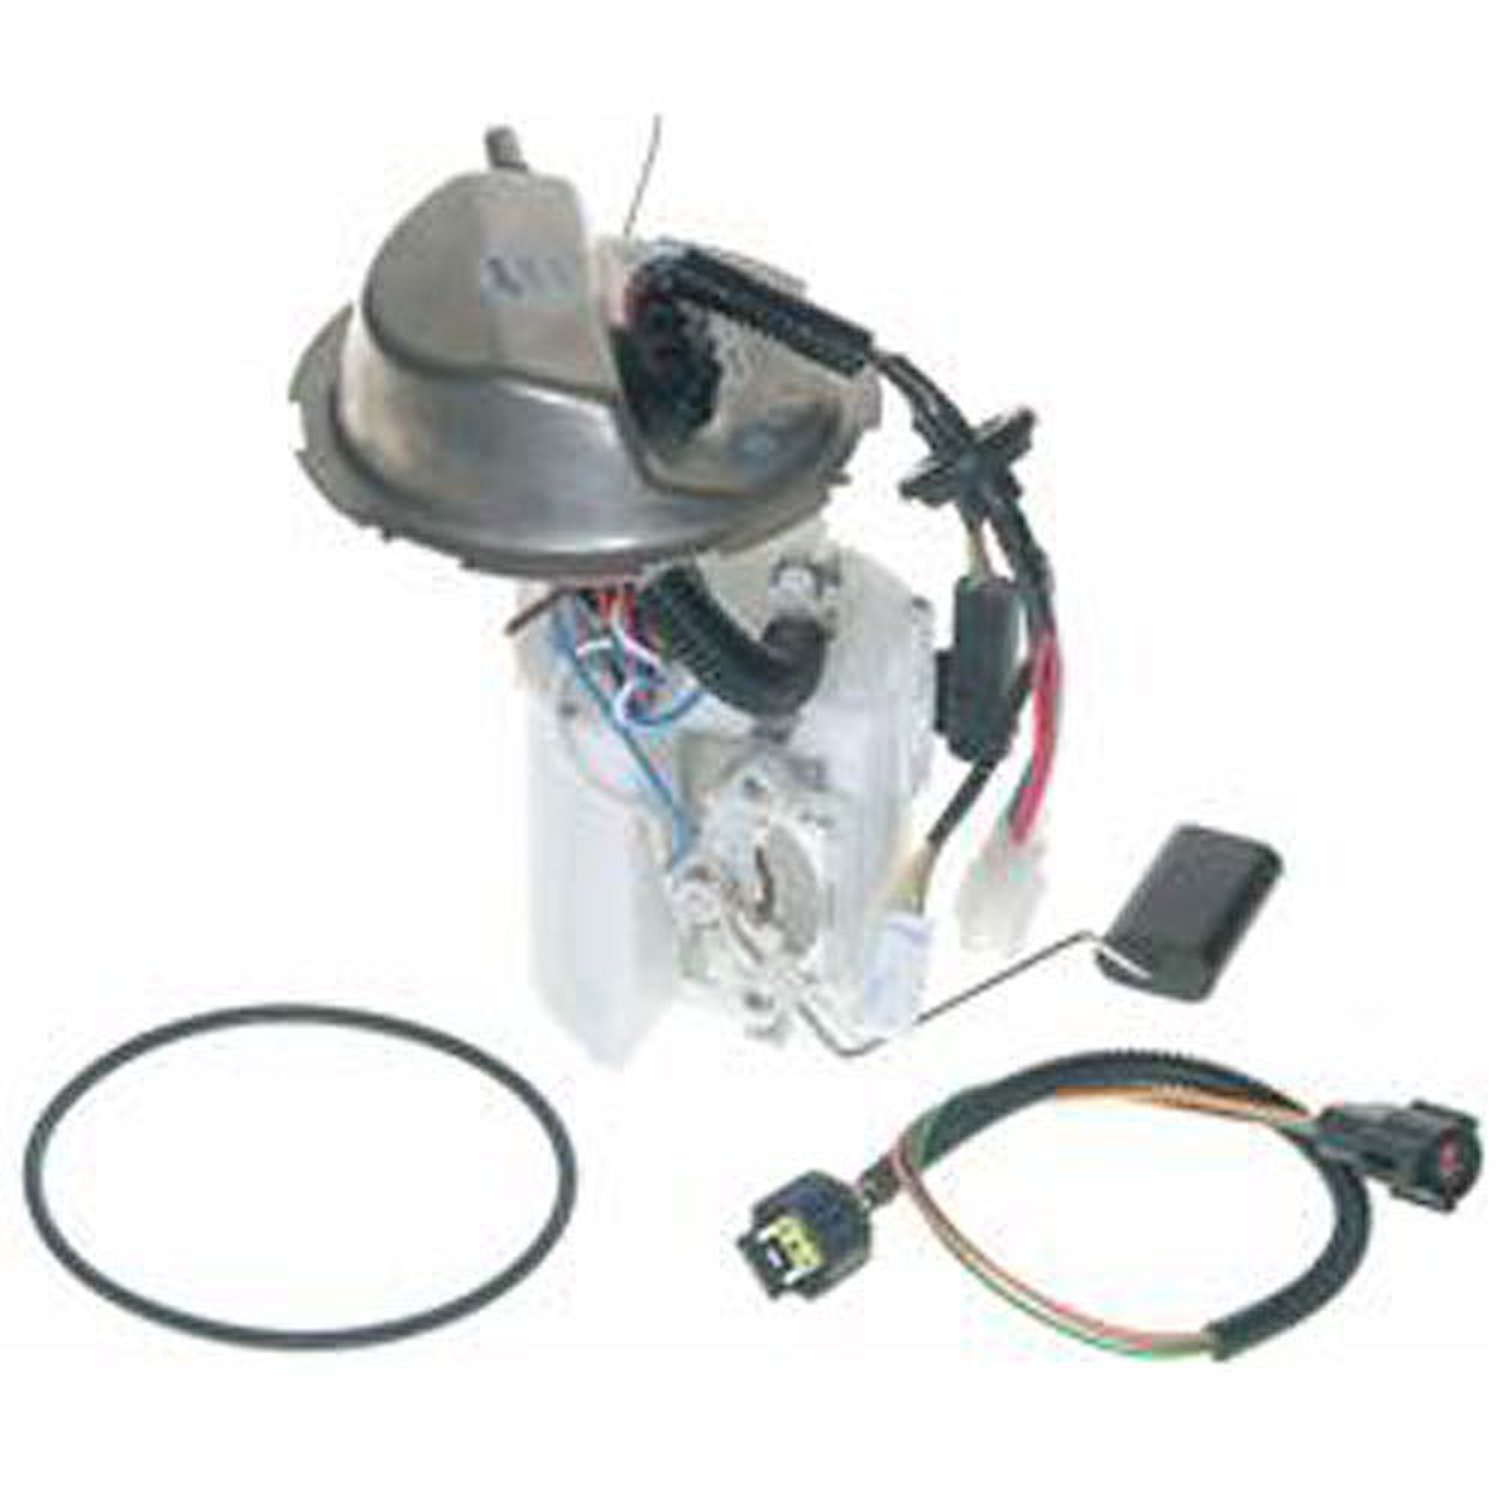 OE Ford Replacement Electric Fuel Pump Module Assembly 1998 Ford Escort 2.0L 4 Cyl